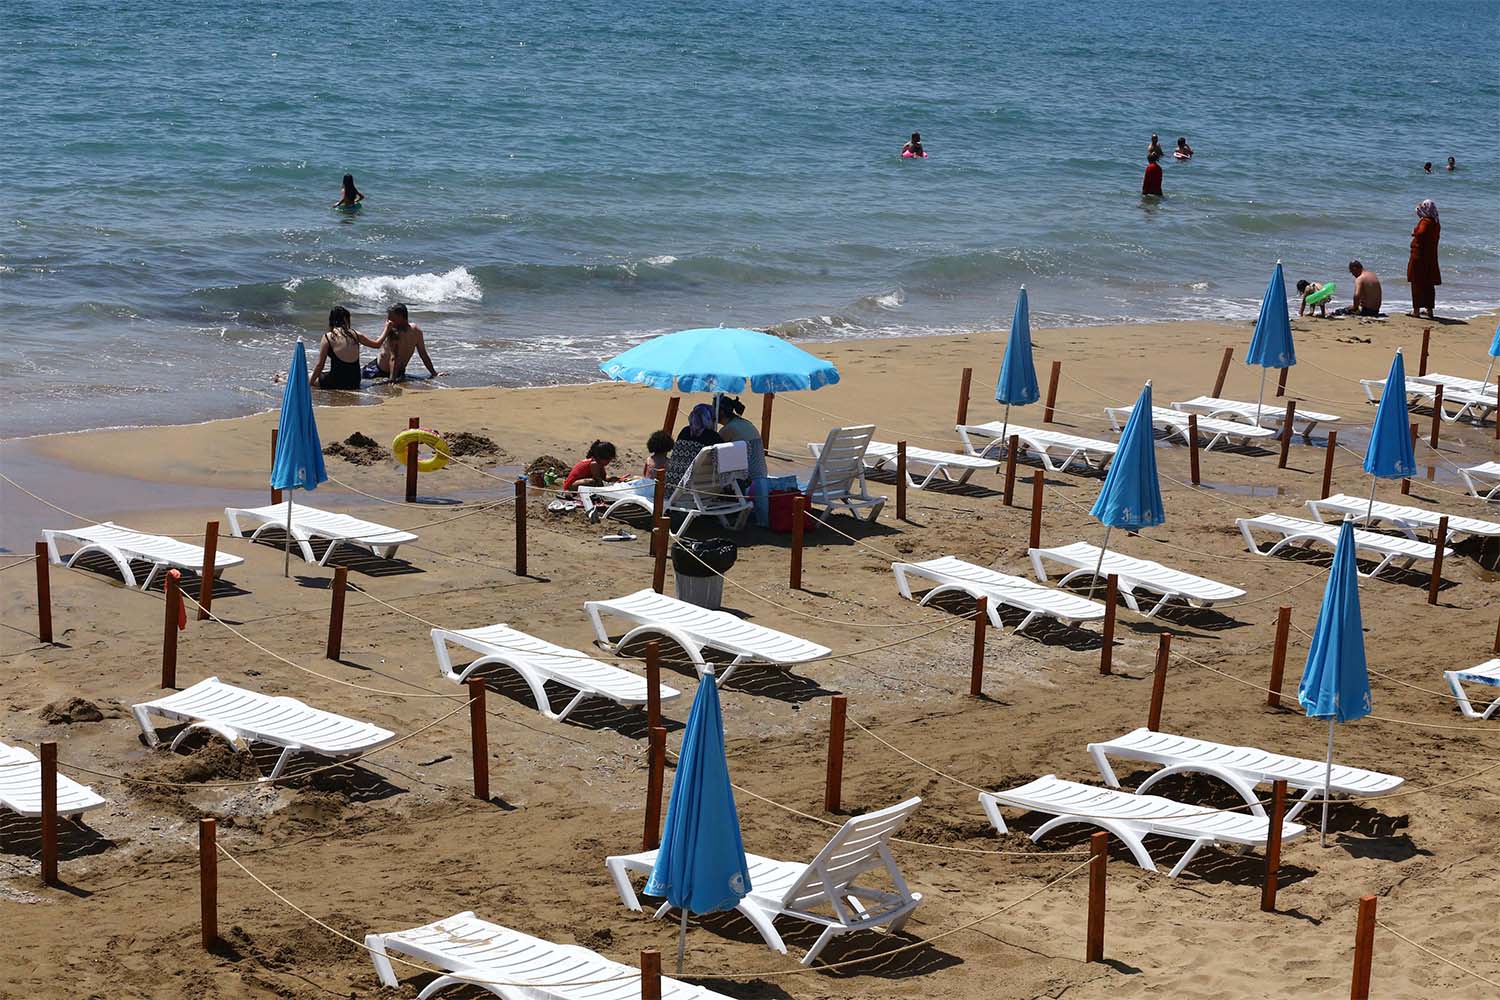 Coronavirus outbreak slashed Turkey's tourism revenues by two thirds in 2020